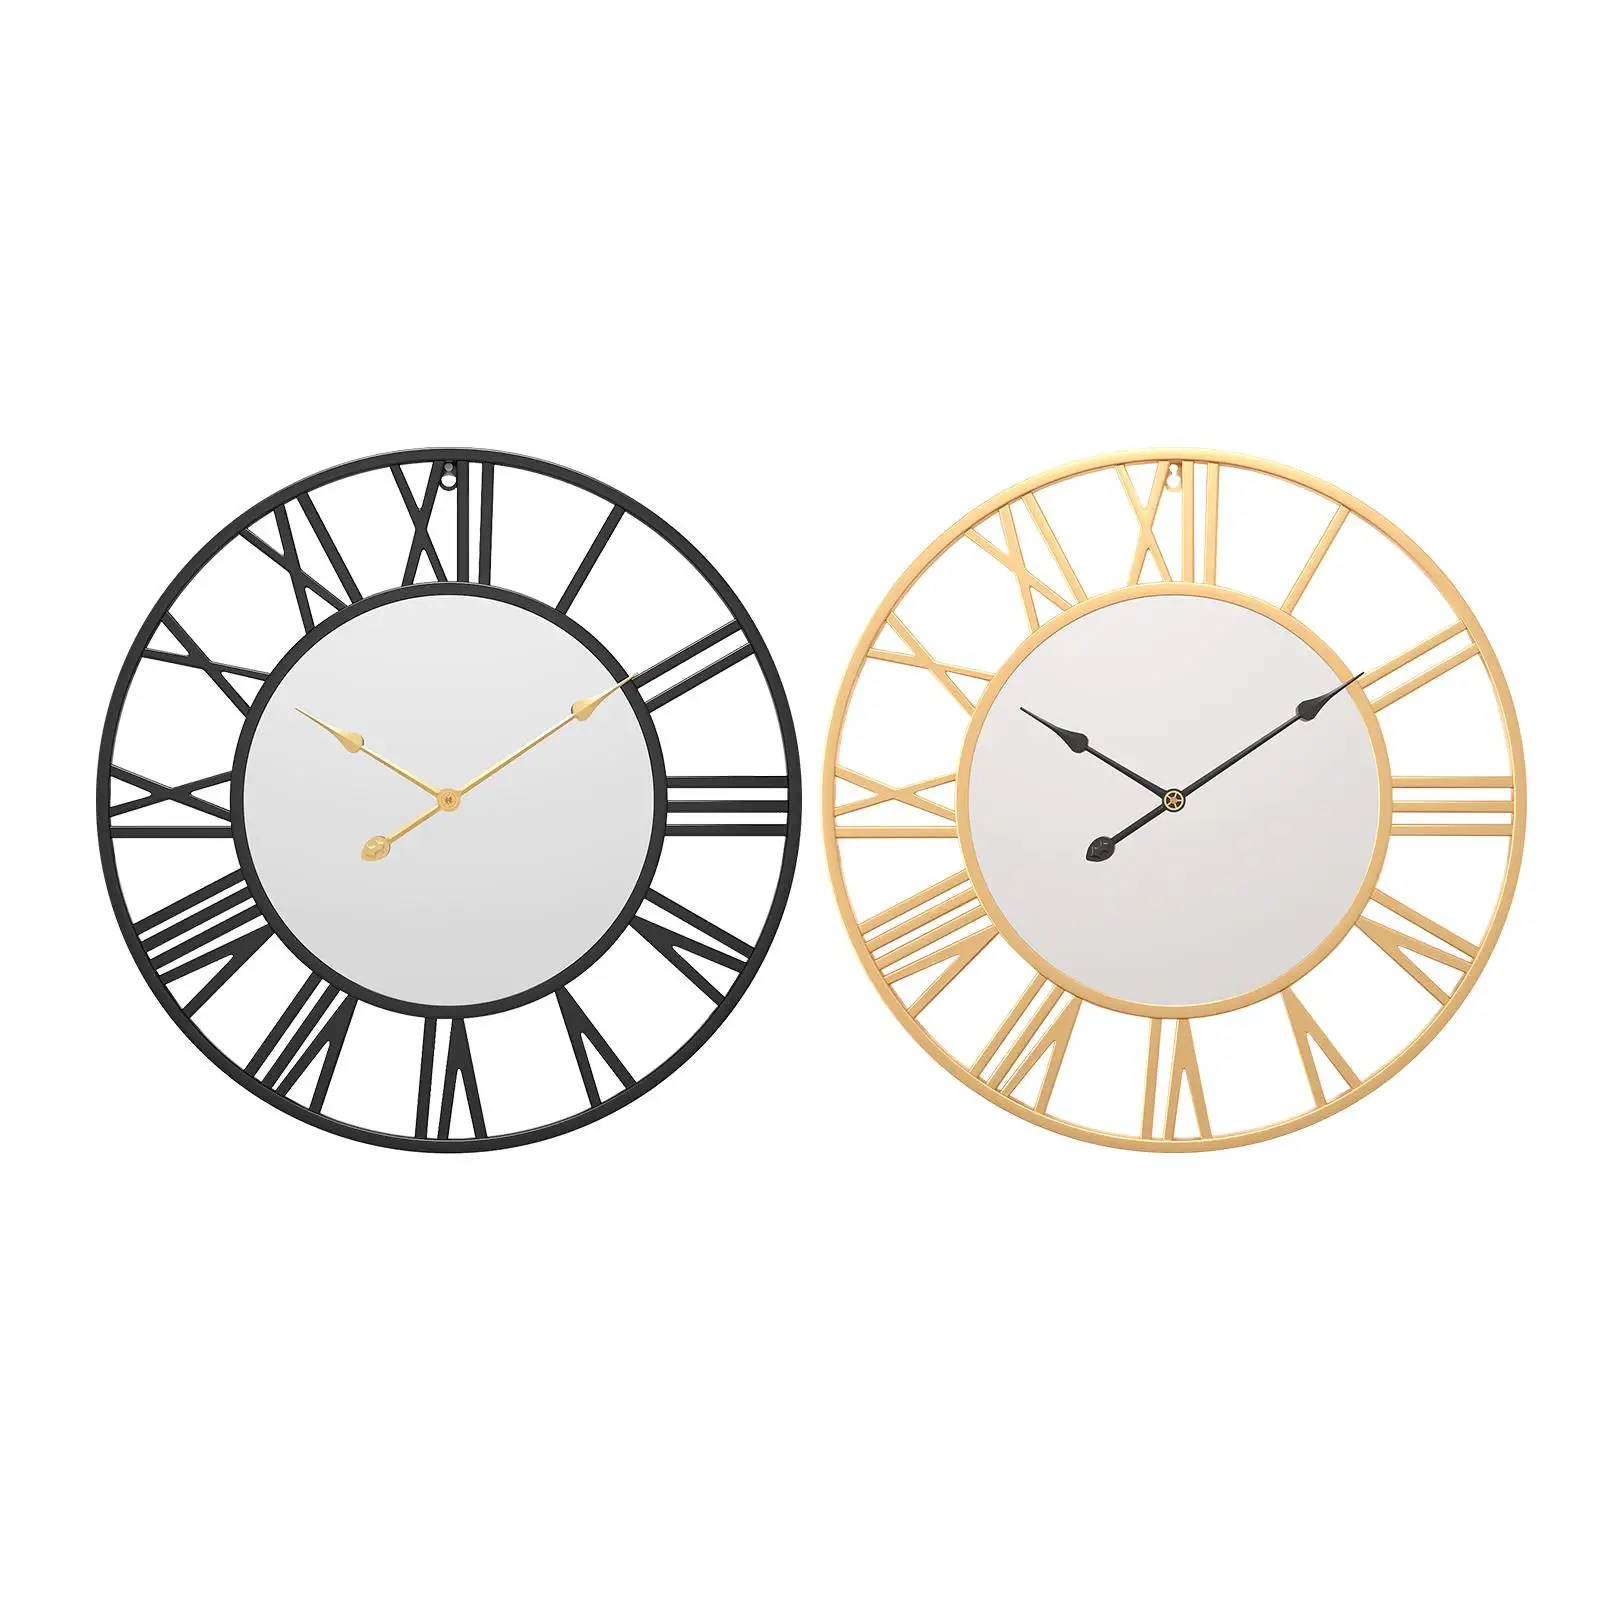 Silent Clock Decoration Roman Numerals 12H Display Battery Operated Round for Cafes Hotels Shops Boys Girls Elderly